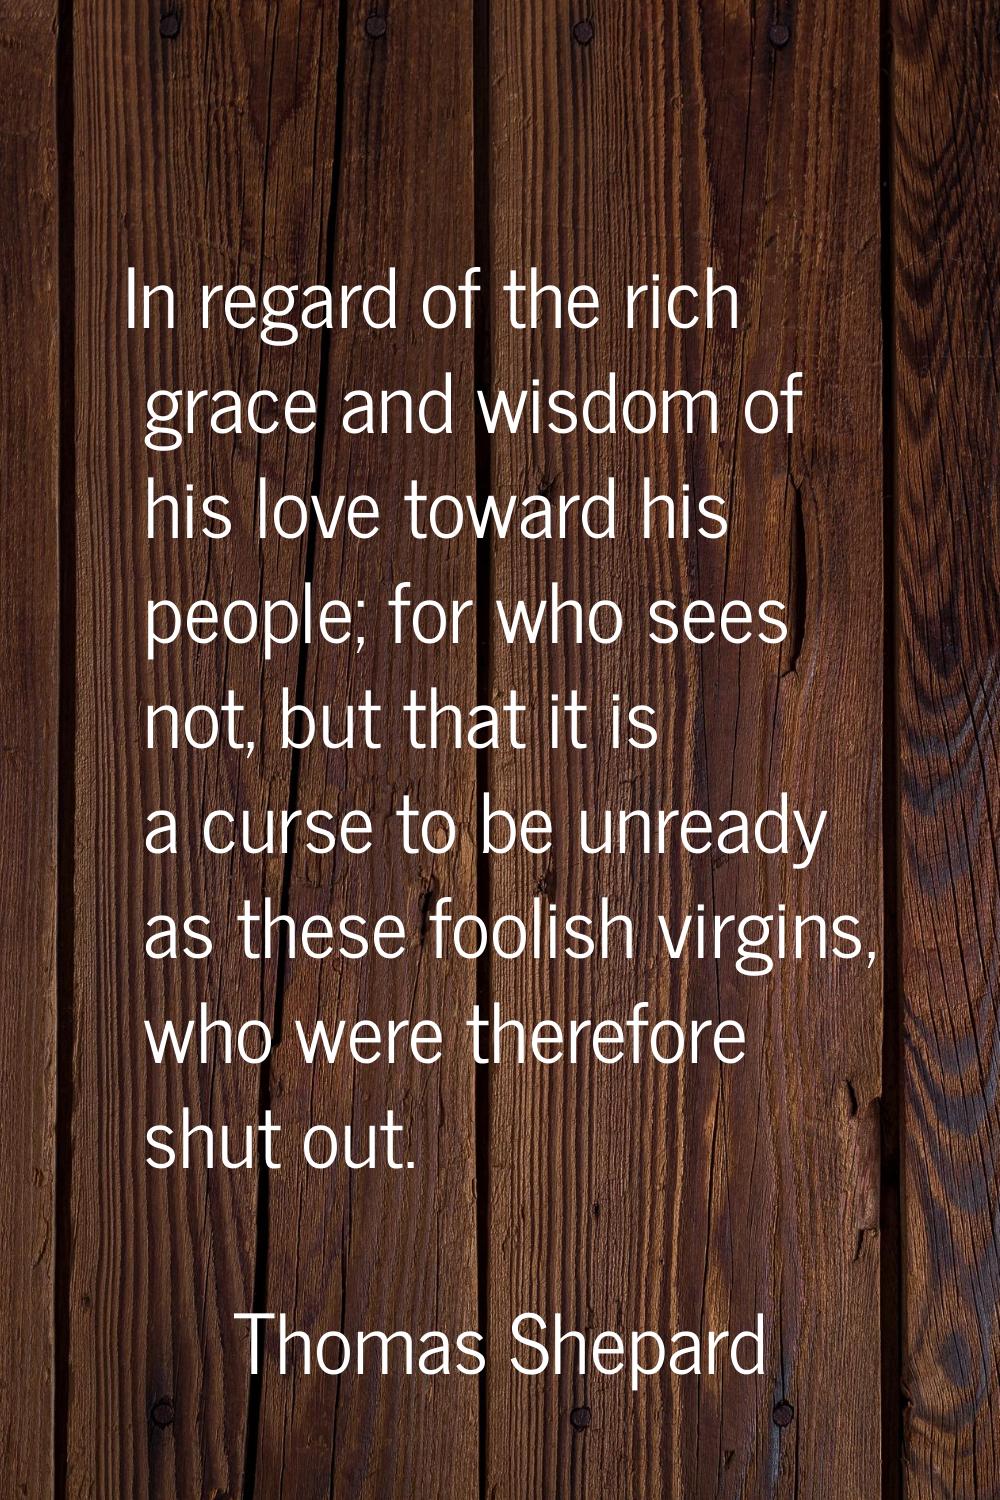 In regard of the rich grace and wisdom of his love toward his people; for who sees not, but that it